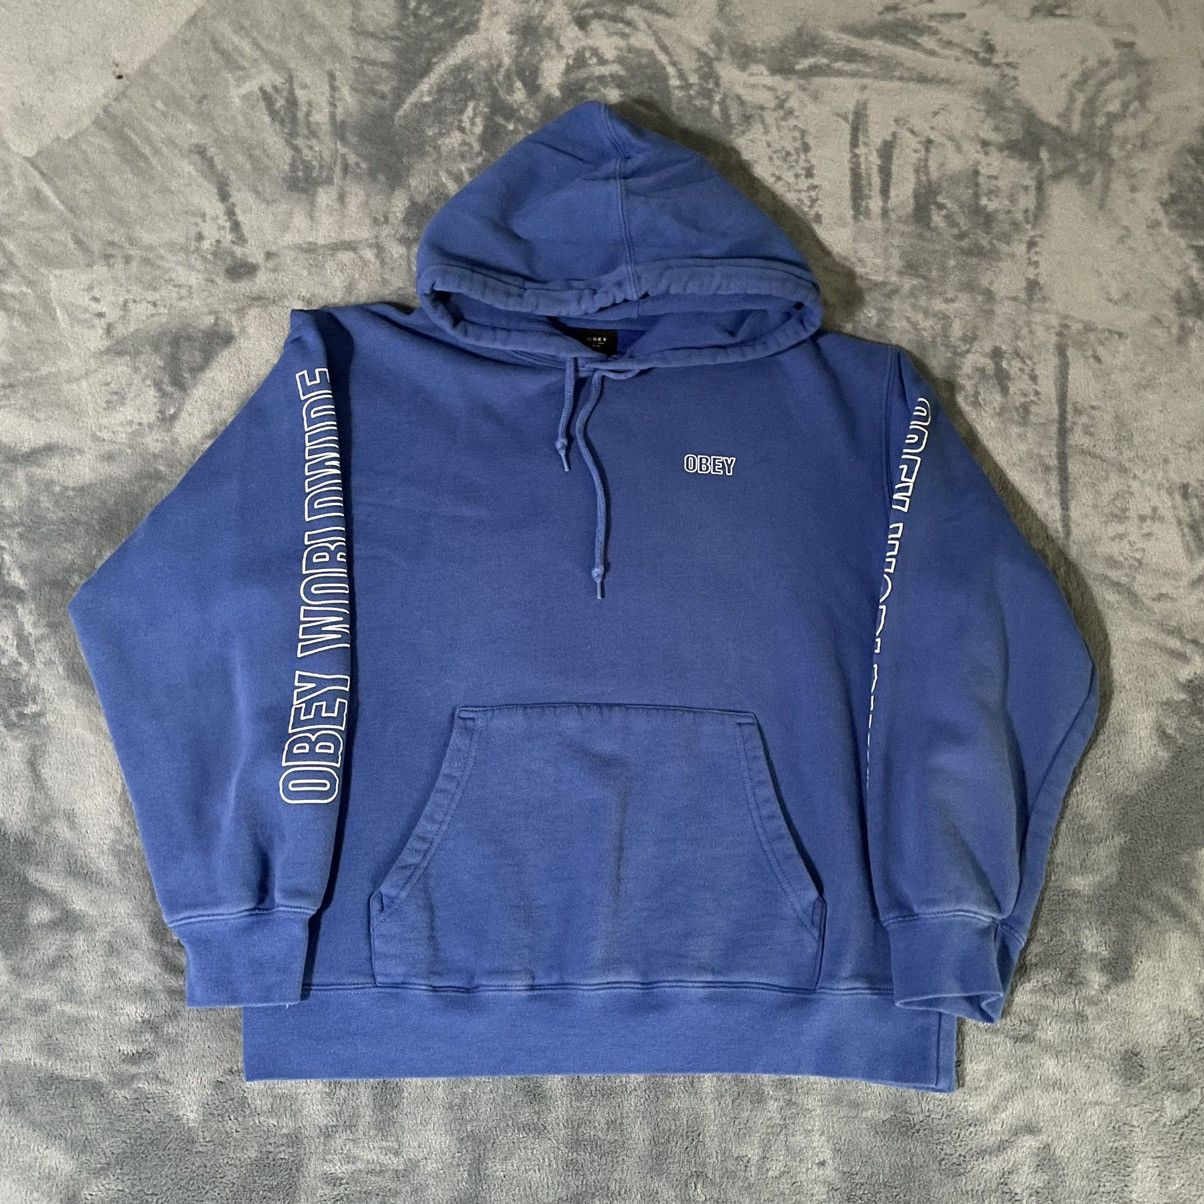 Obey Obey Hoodie Size US S / EU 44-46 / 1 - 1 Preview